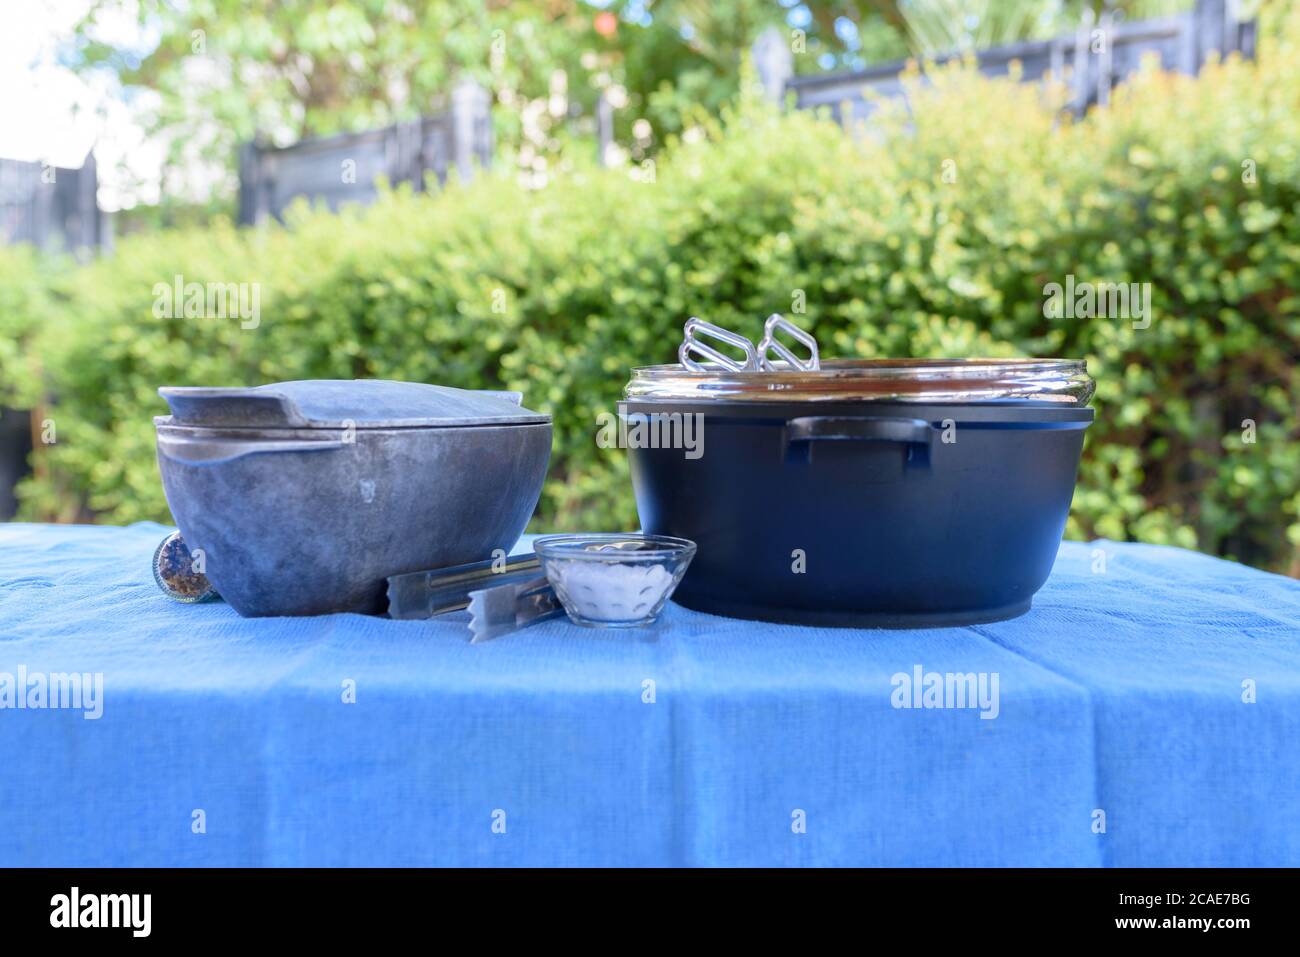 Preparing for a barbecue outside in the Summer Garden. Pots, bbq tongs, salt, spices on a table with a blue tablecloth.Retro style. Stock Photo